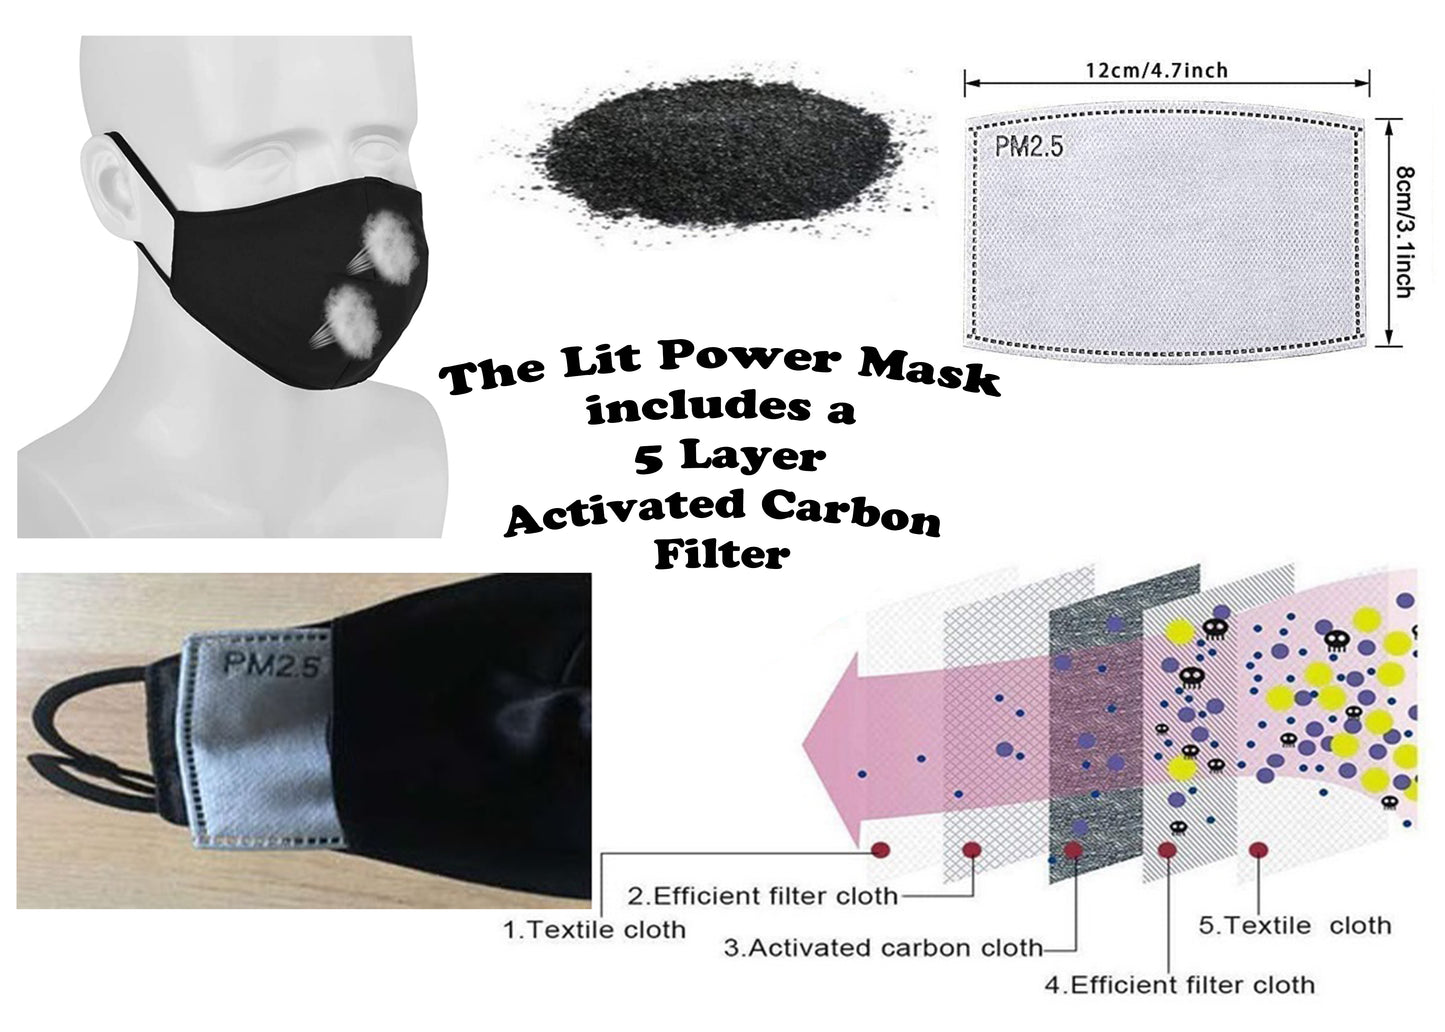 The Lit Power Mask